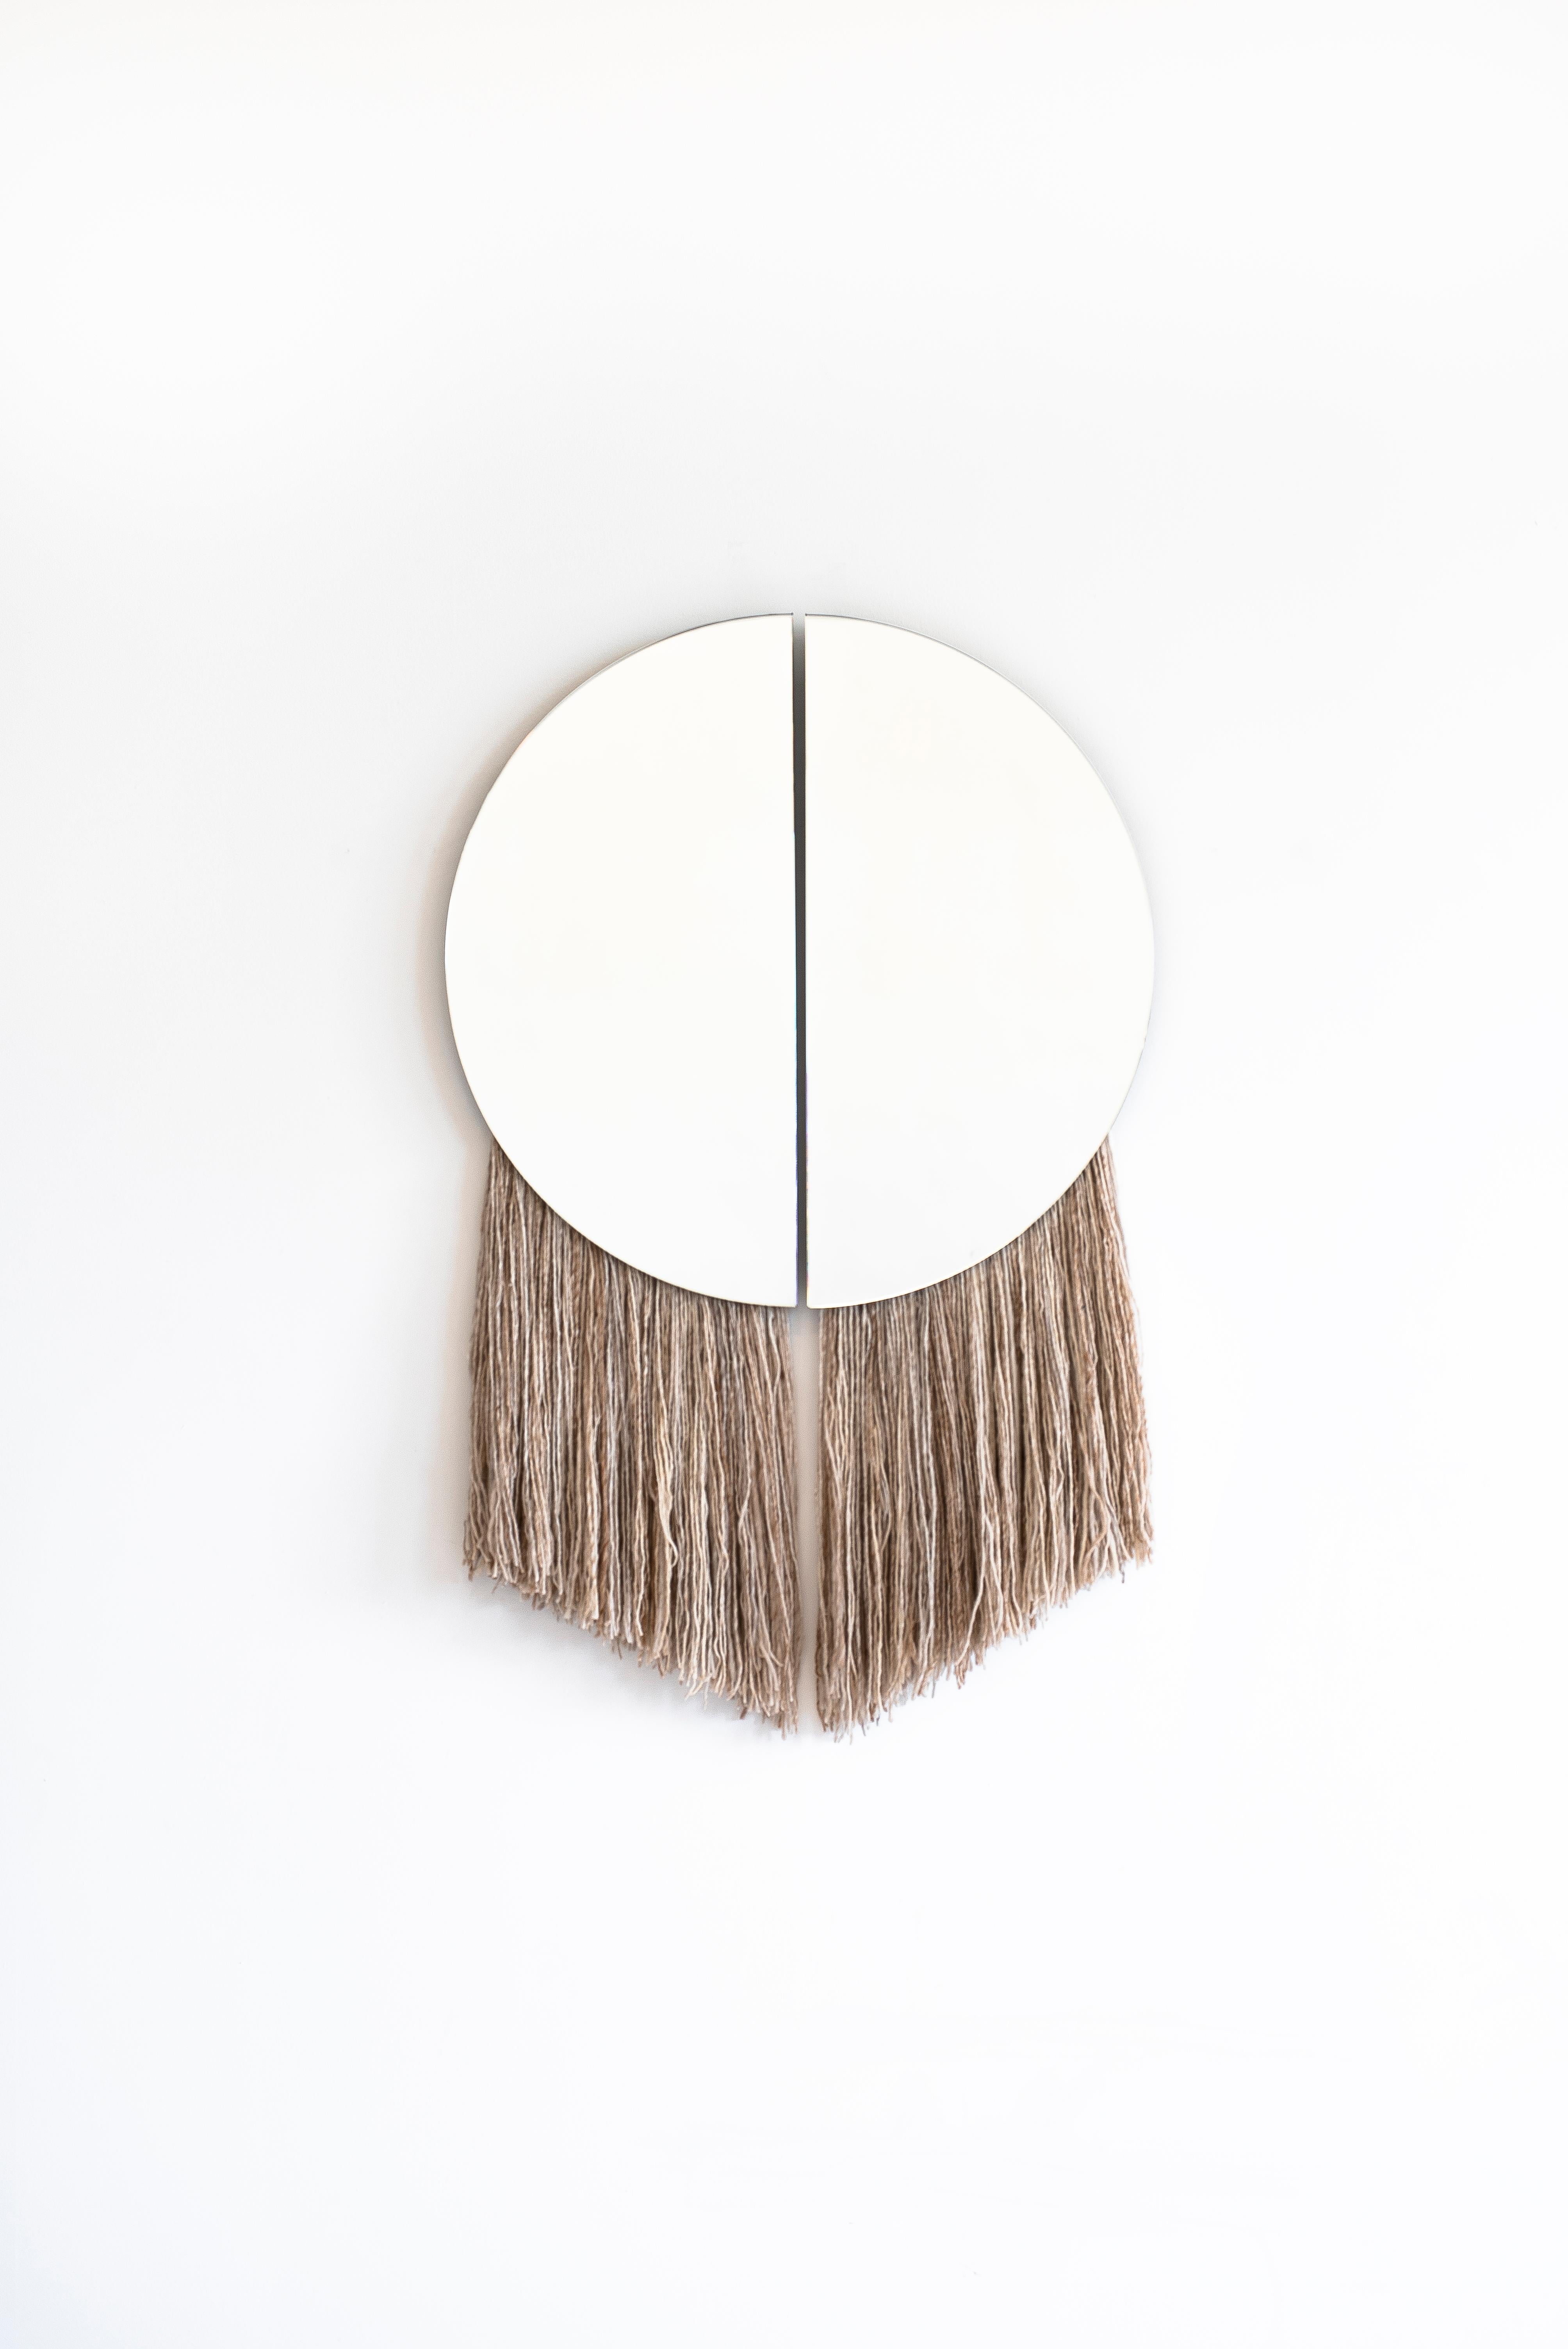 Named for the Greek God of the Sun, the Apollo Mirror is the marriage of sculptural and functional object, with two half circle mirrors joined by negative space and partnered with hand-spun, hand painted silk fiber.

Customization of mirror color,